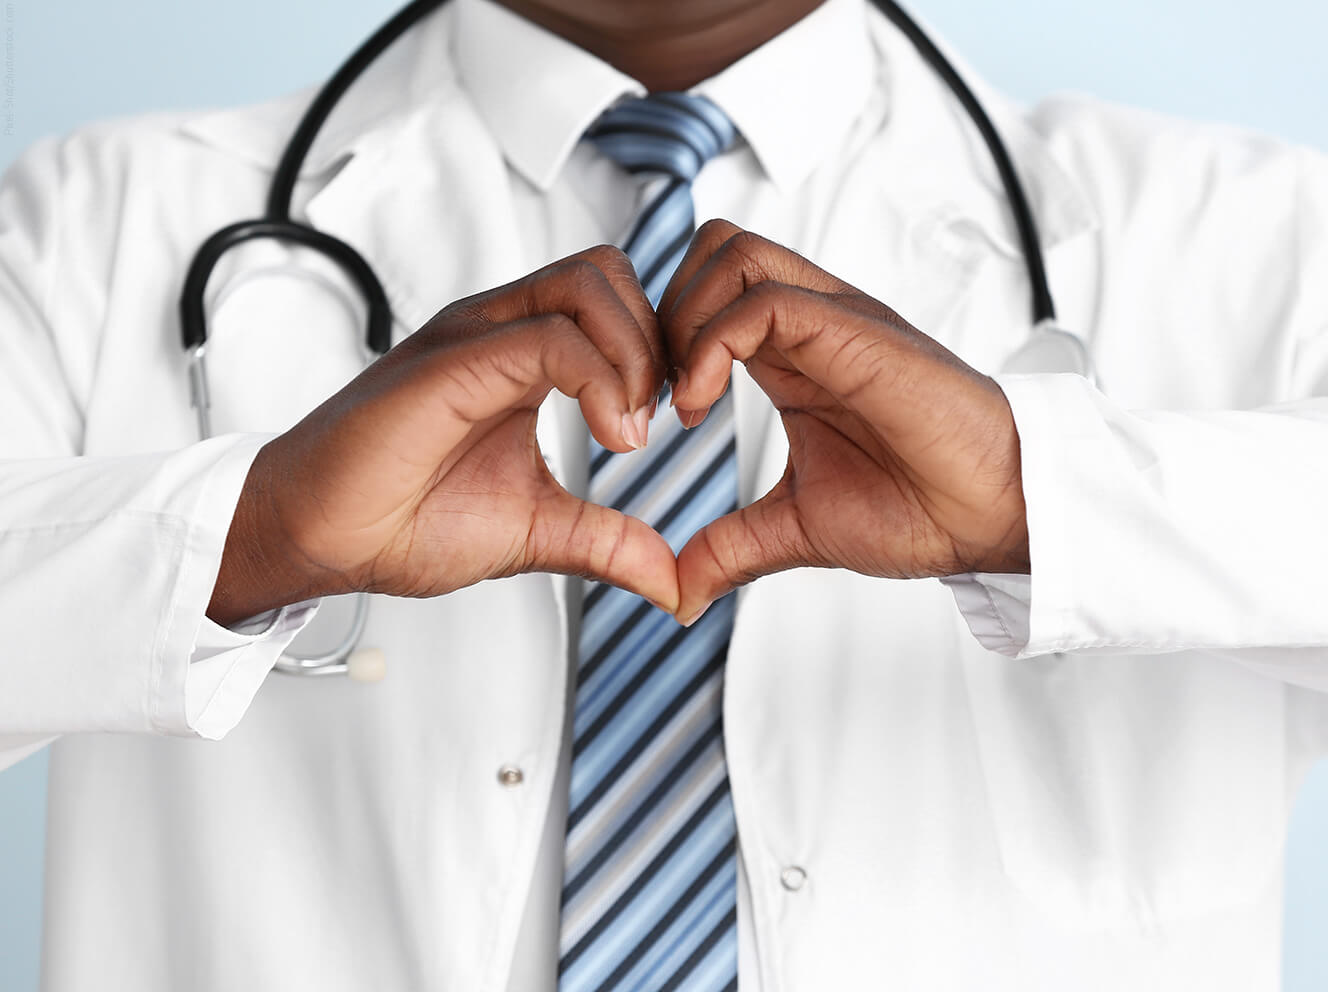 Close-up of a Black physician in a lab coat forming a heart shape with their hands